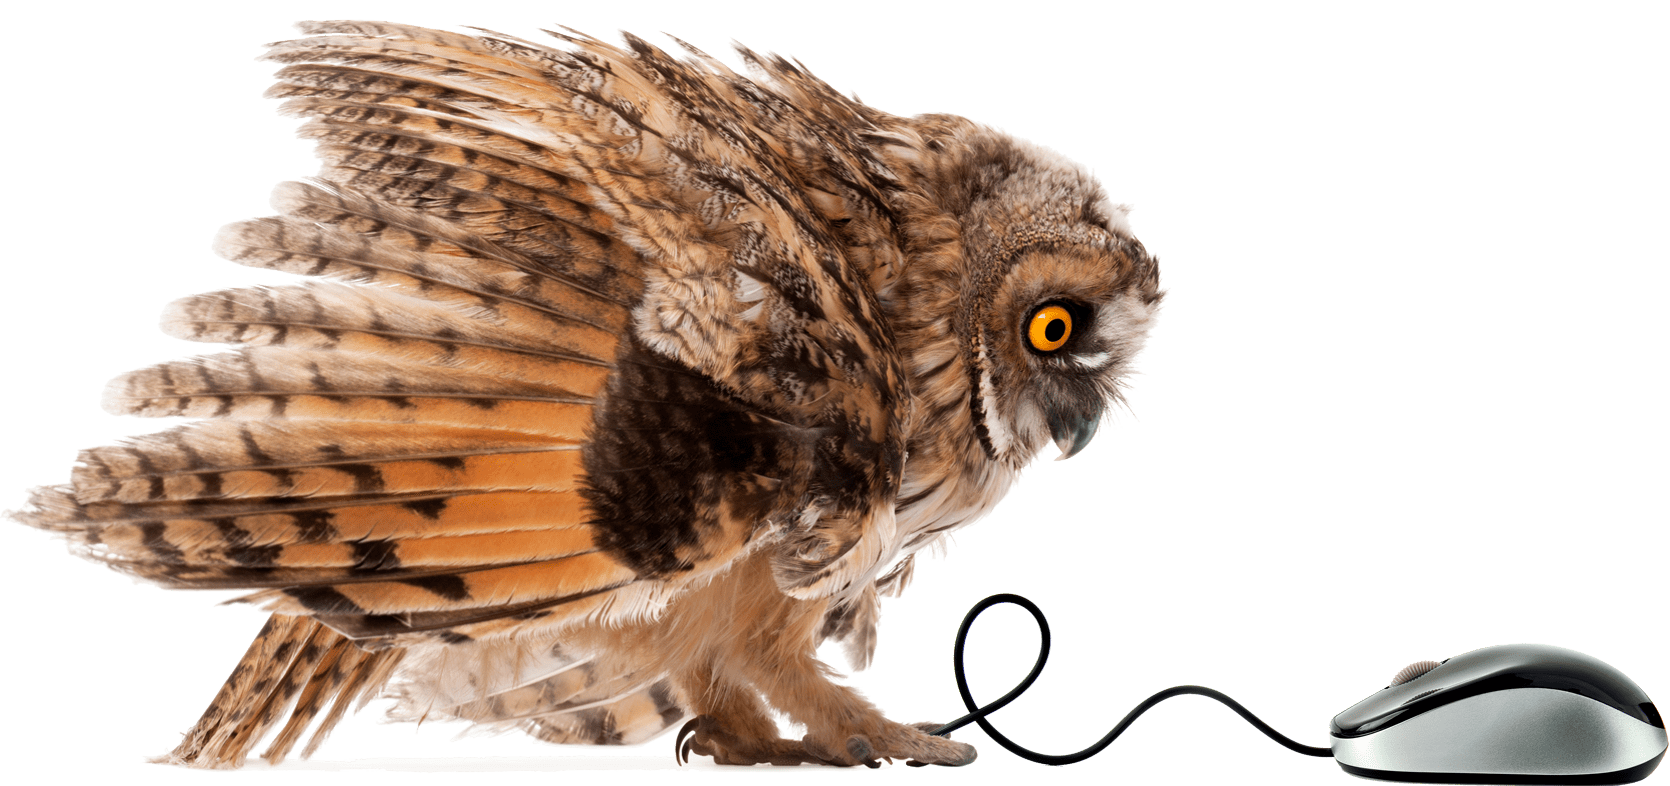 Owl playing with mechanical mouse